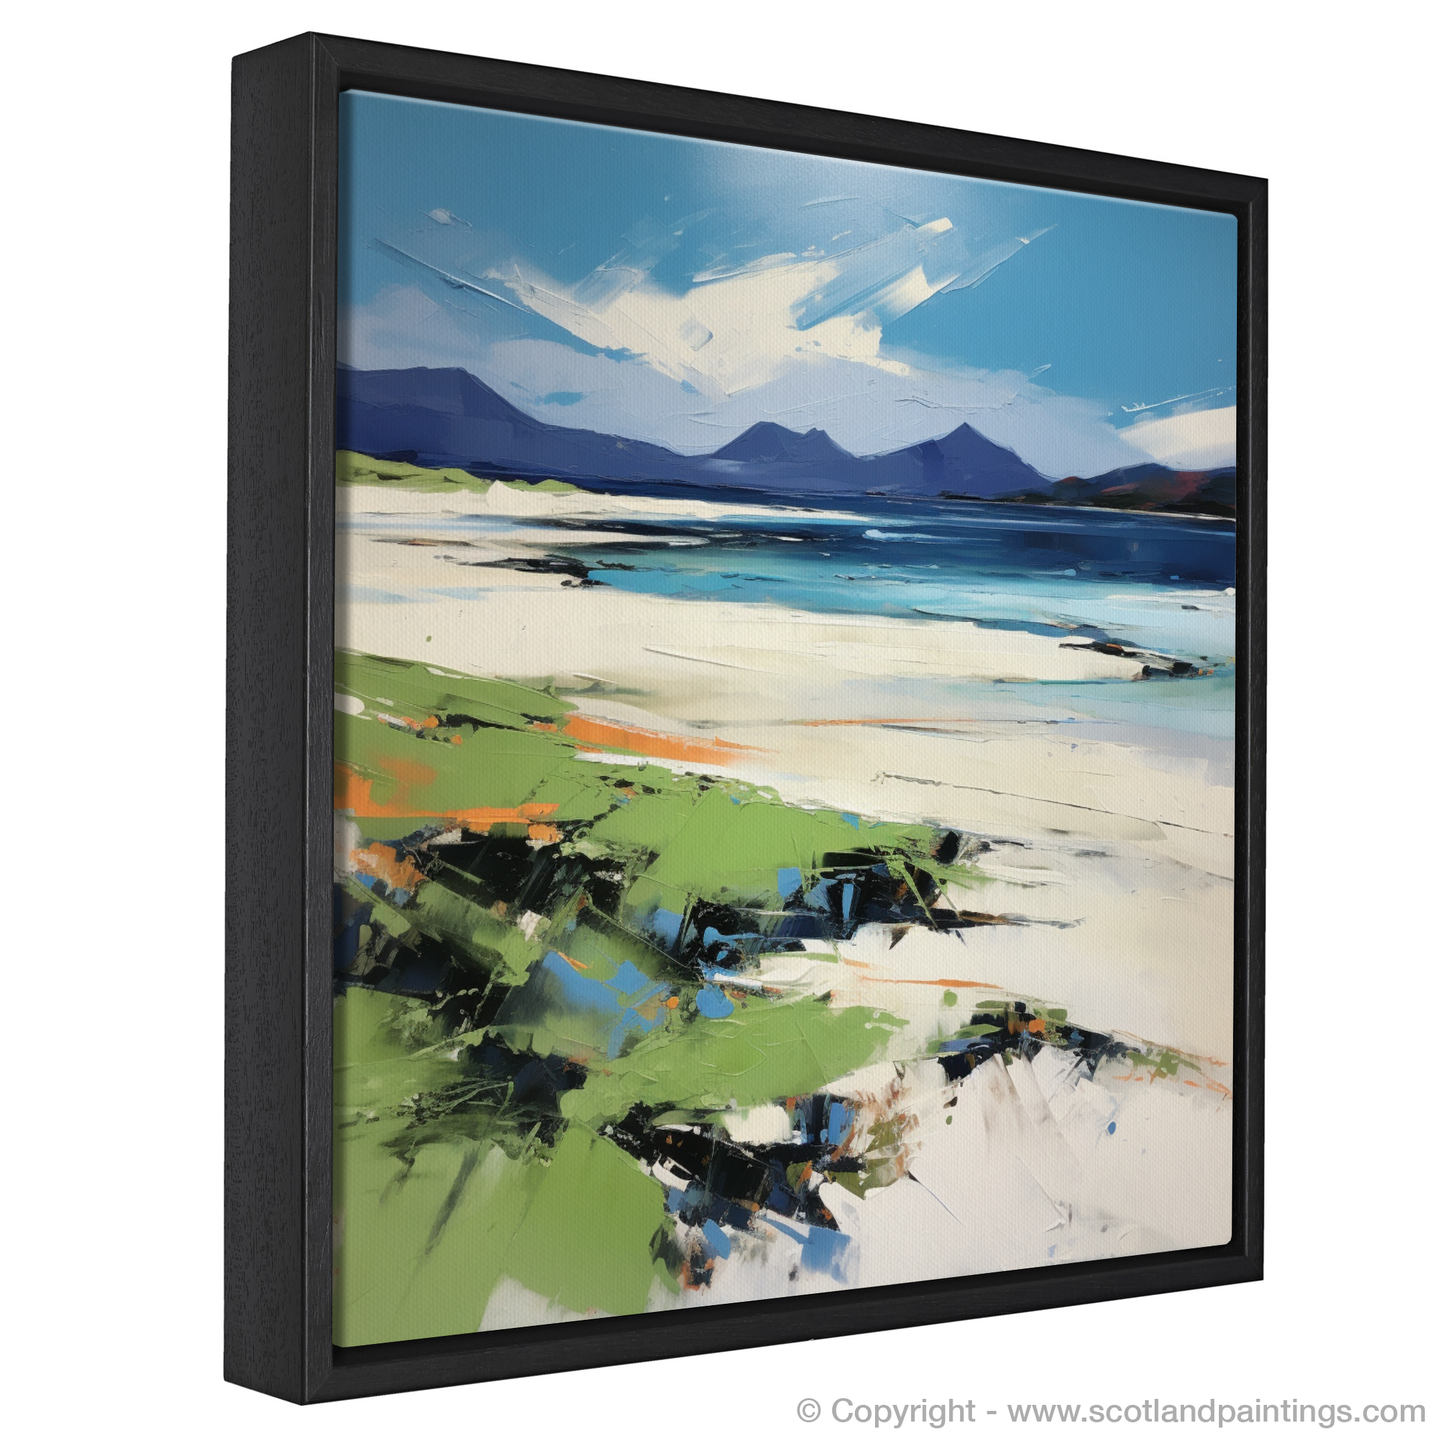 Painting and Art Print of Mellon Udrigle Beach, Wester Ross in summer entitled "Mellon Udrigle Beach Rhapsody: A Wester Ross Summer Expression".